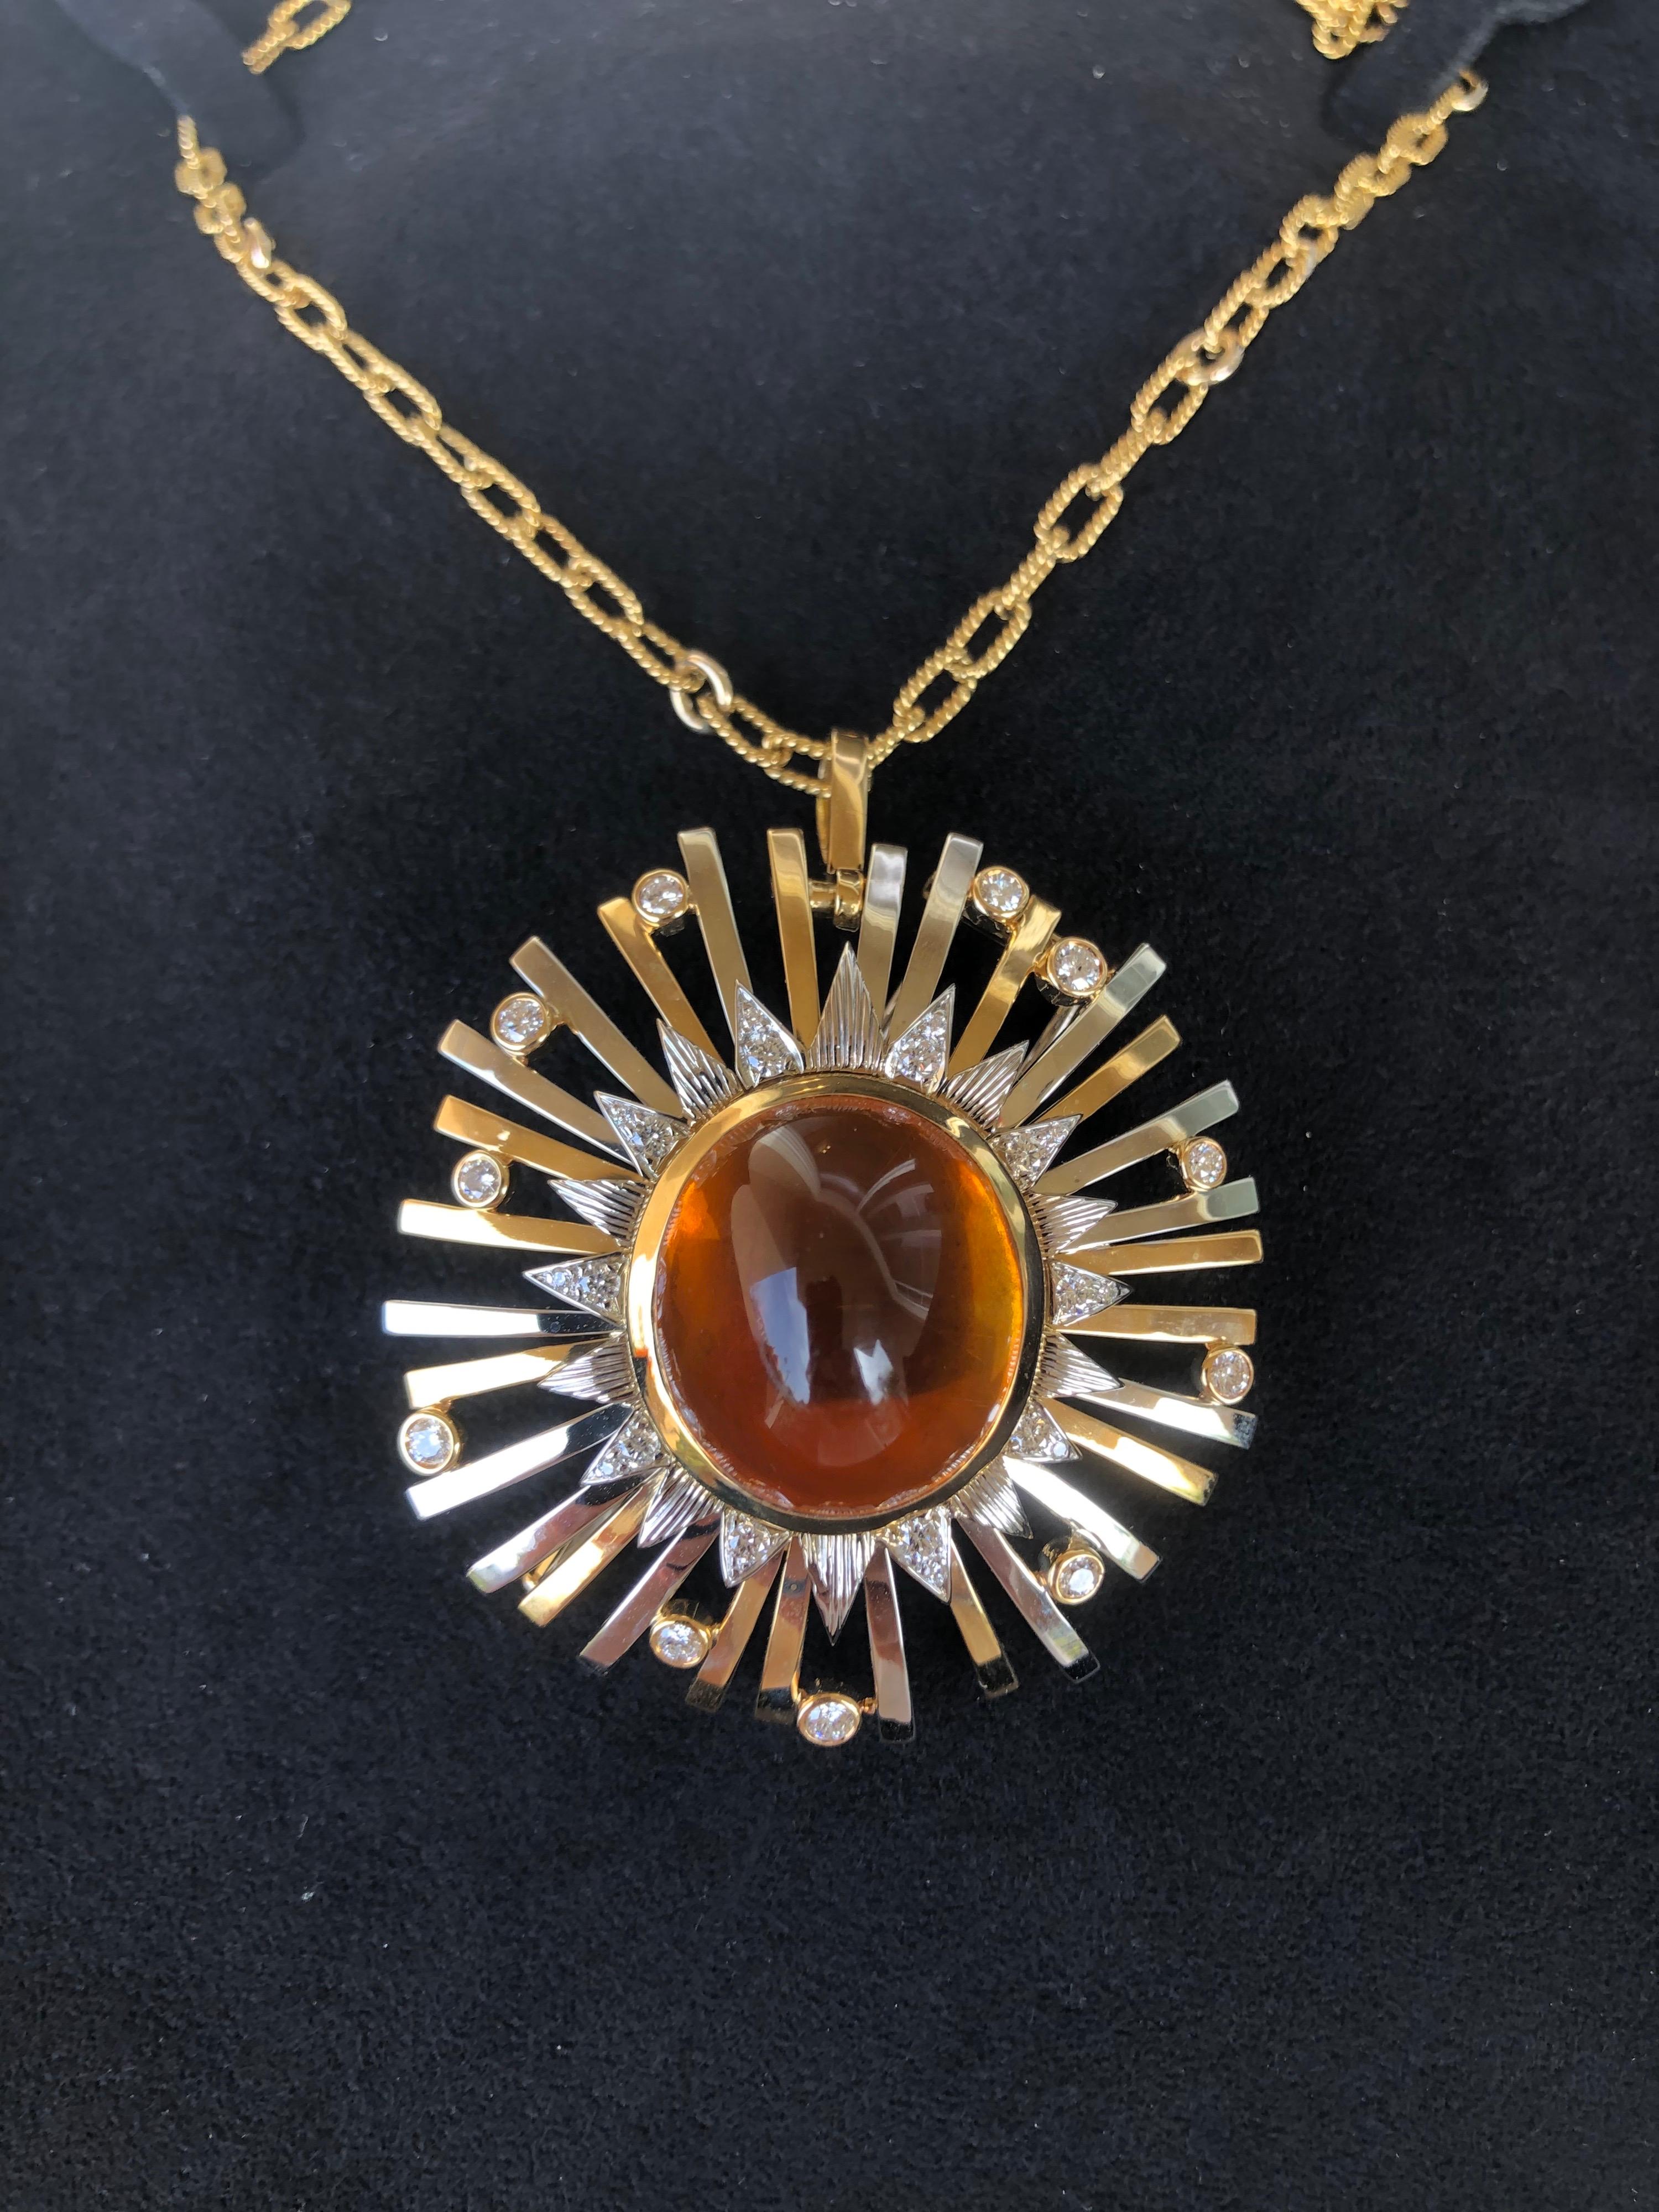 Madeira Citrine Cabochon 24.14 Carat Pendant Necklace Brooch For Sale 12